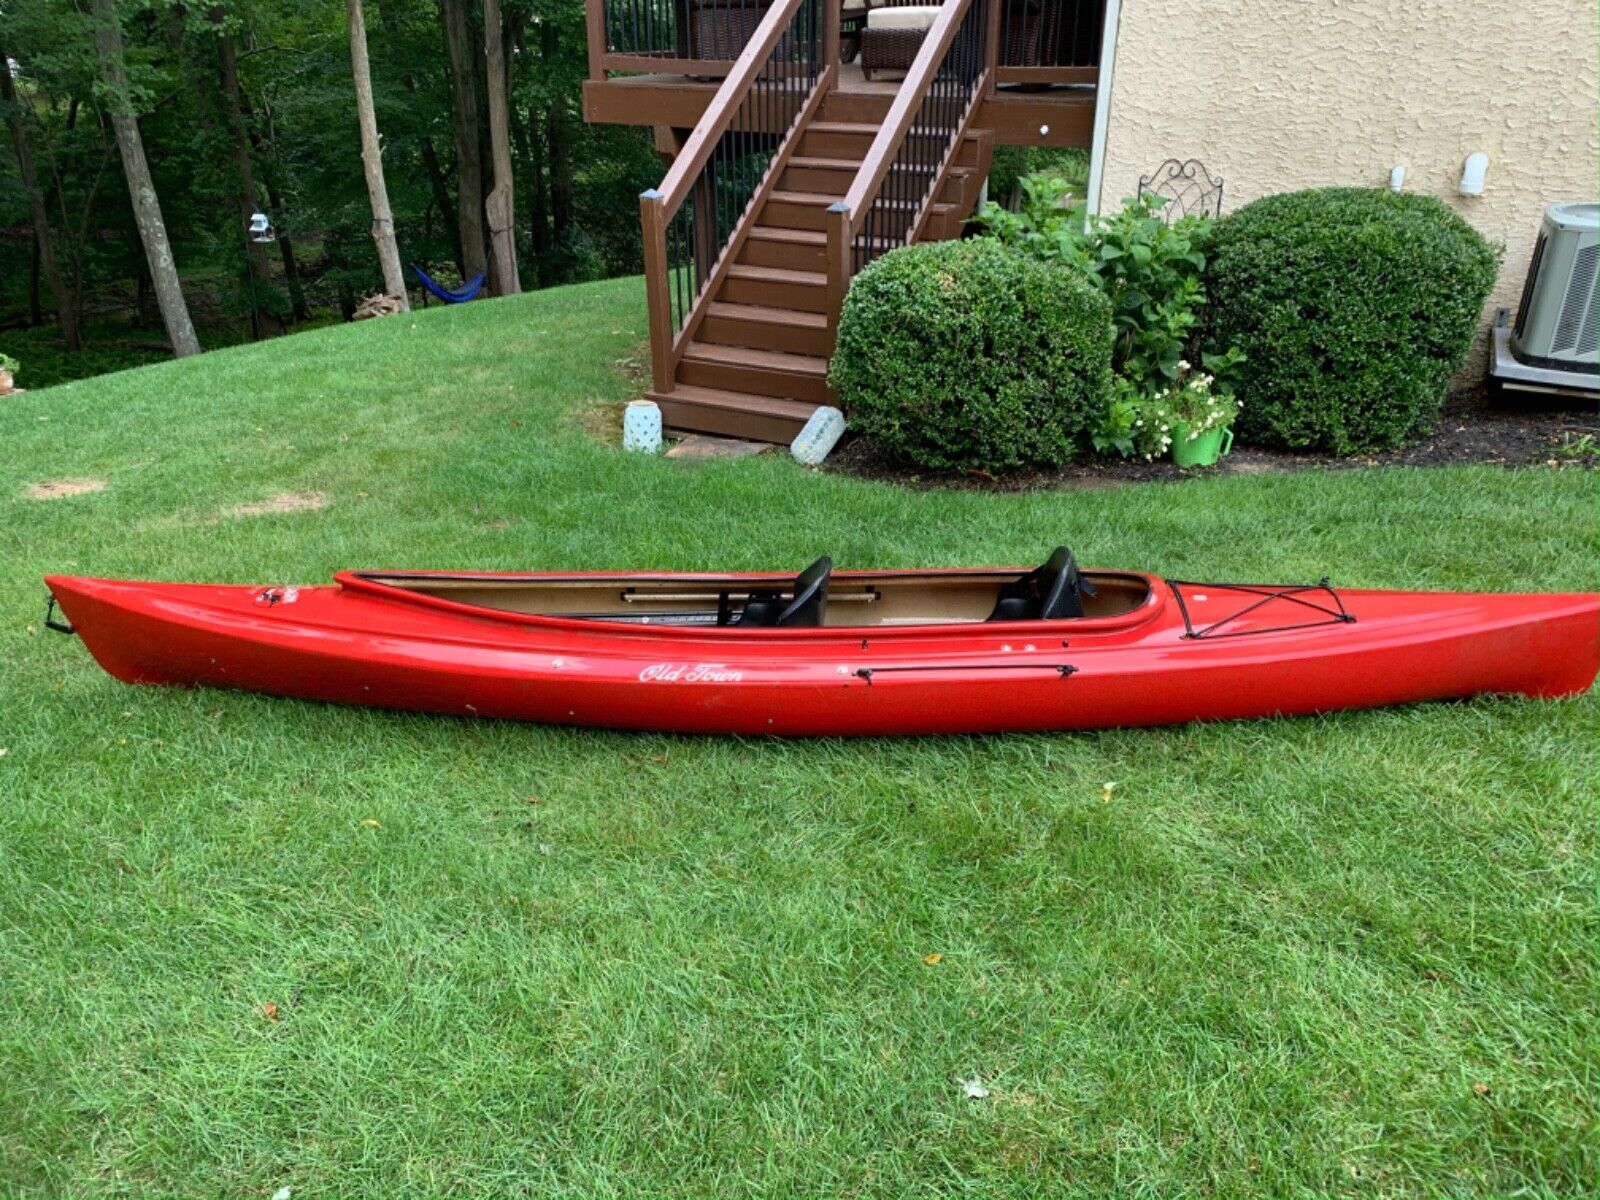 Old town loon 138 kayak in red - Slightly used 